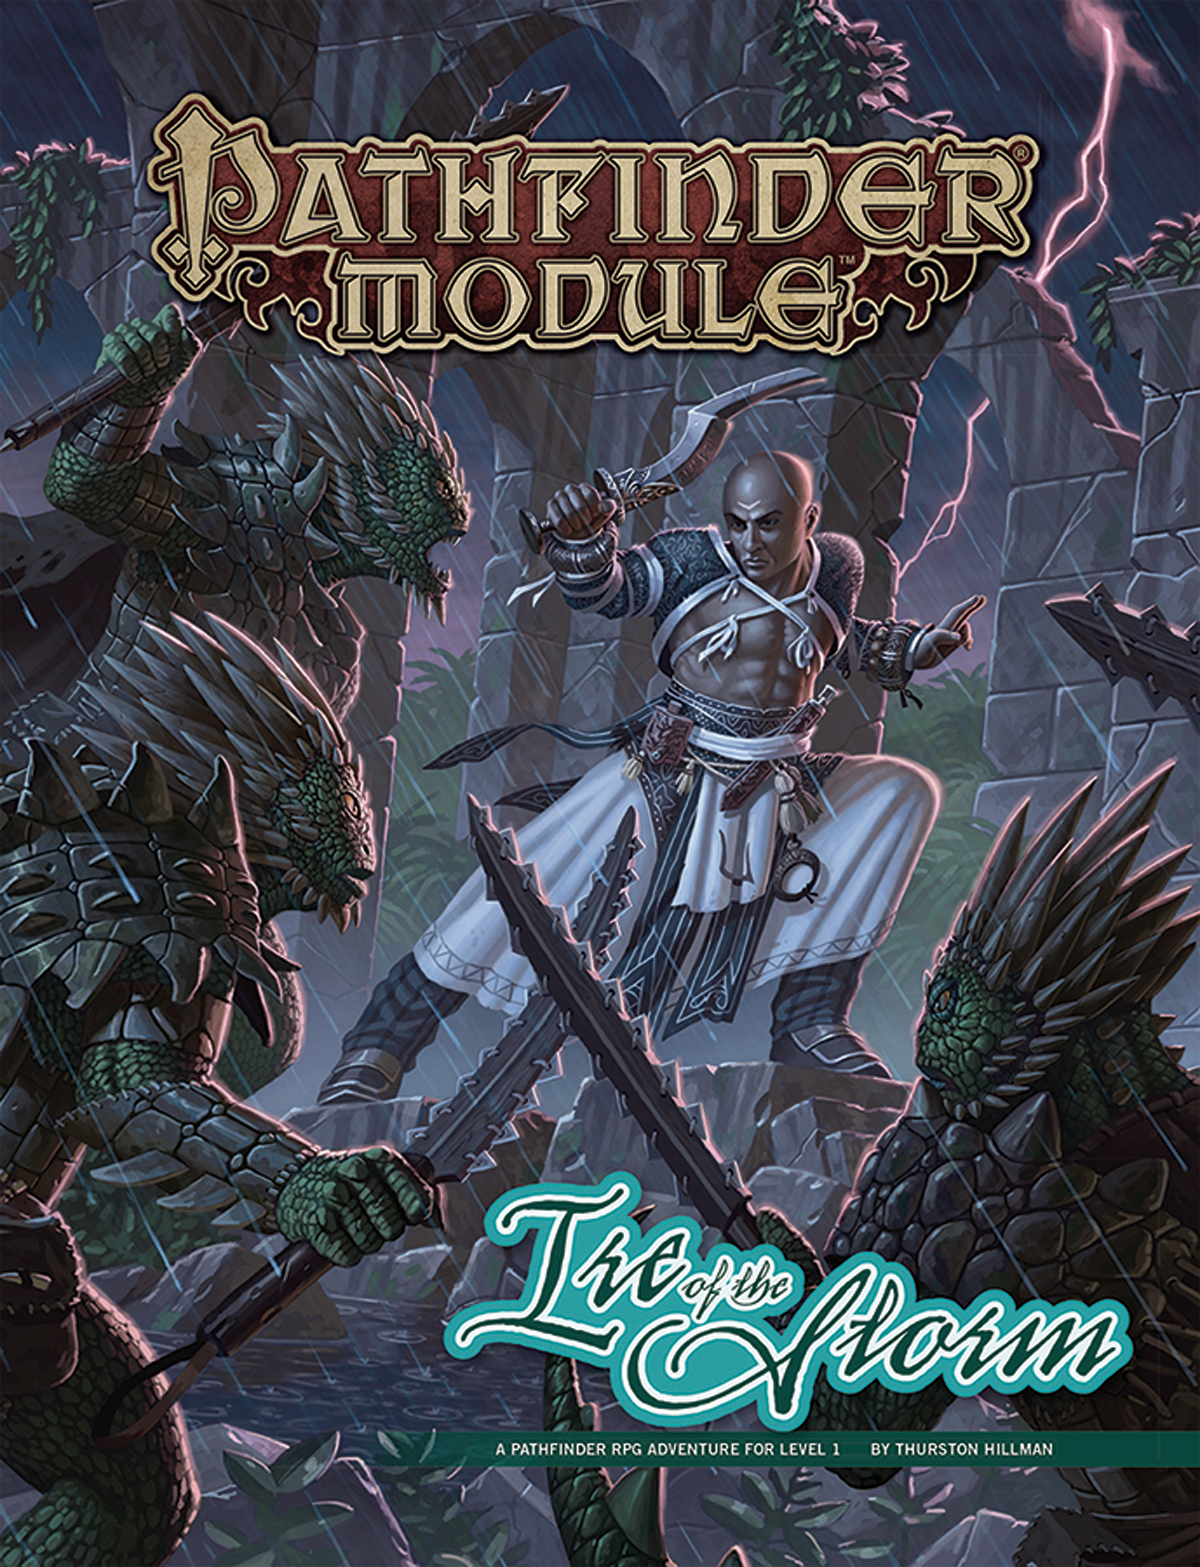 Pathfinder module: ire of the storm.